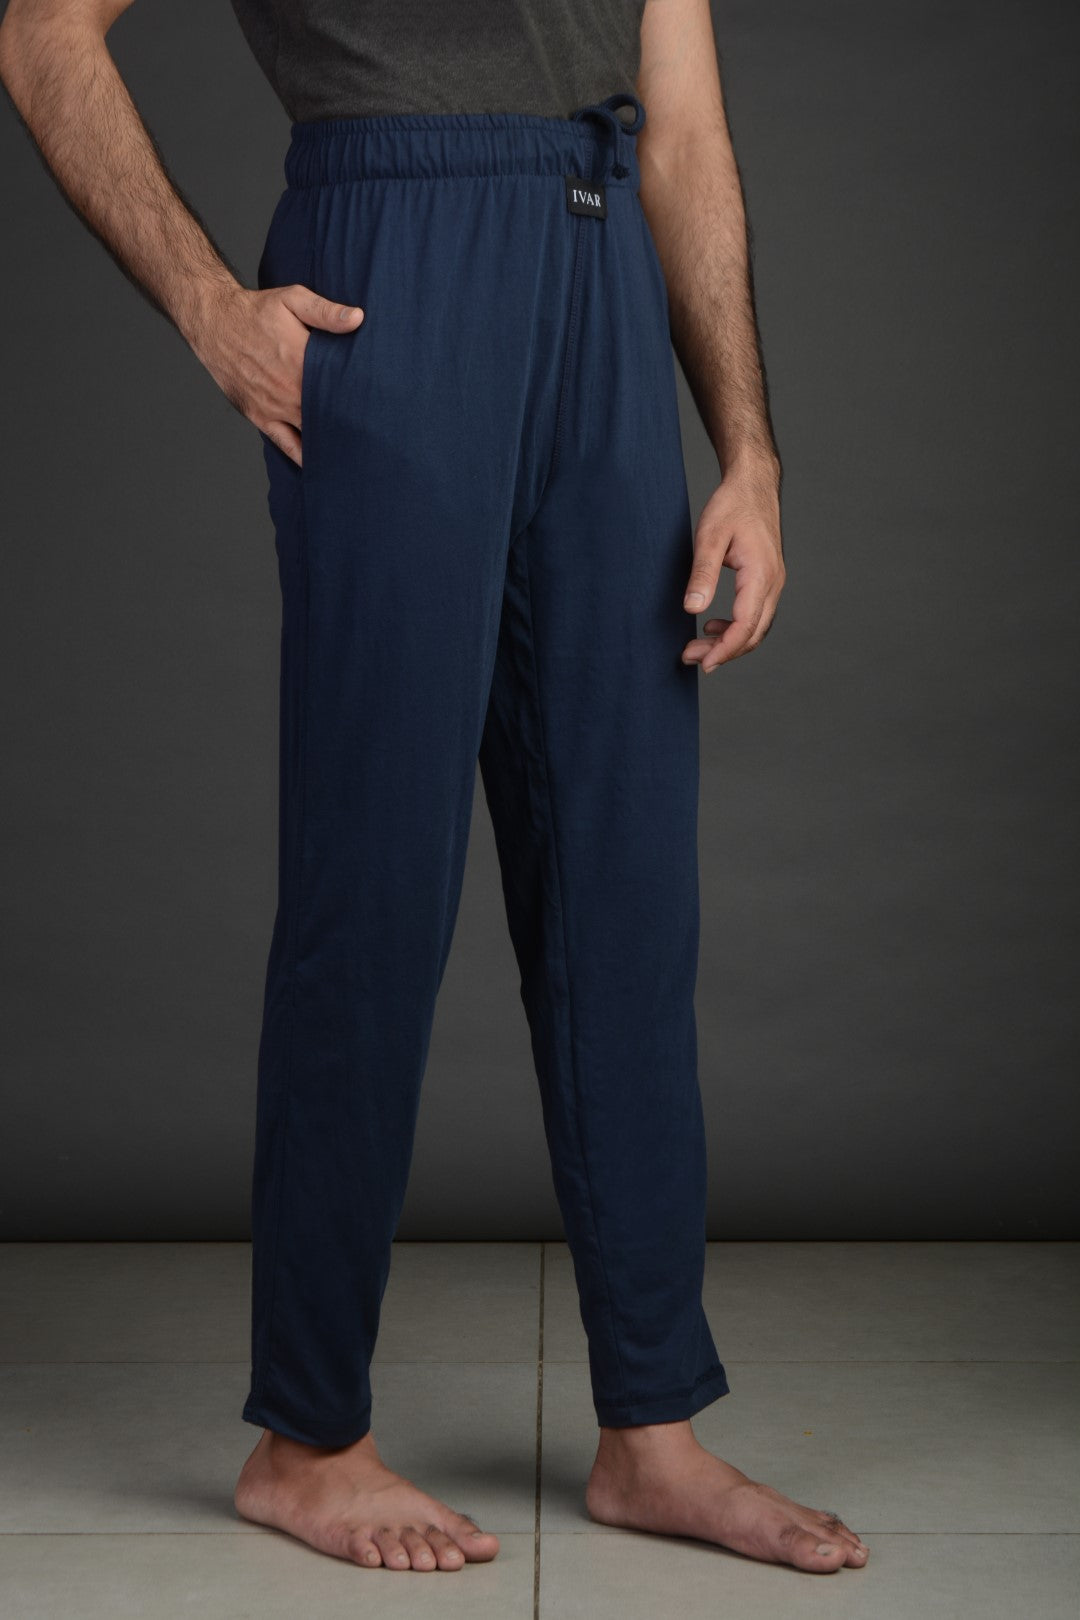 Navy Blue Knitted Pajama (100% Combed Cotton)